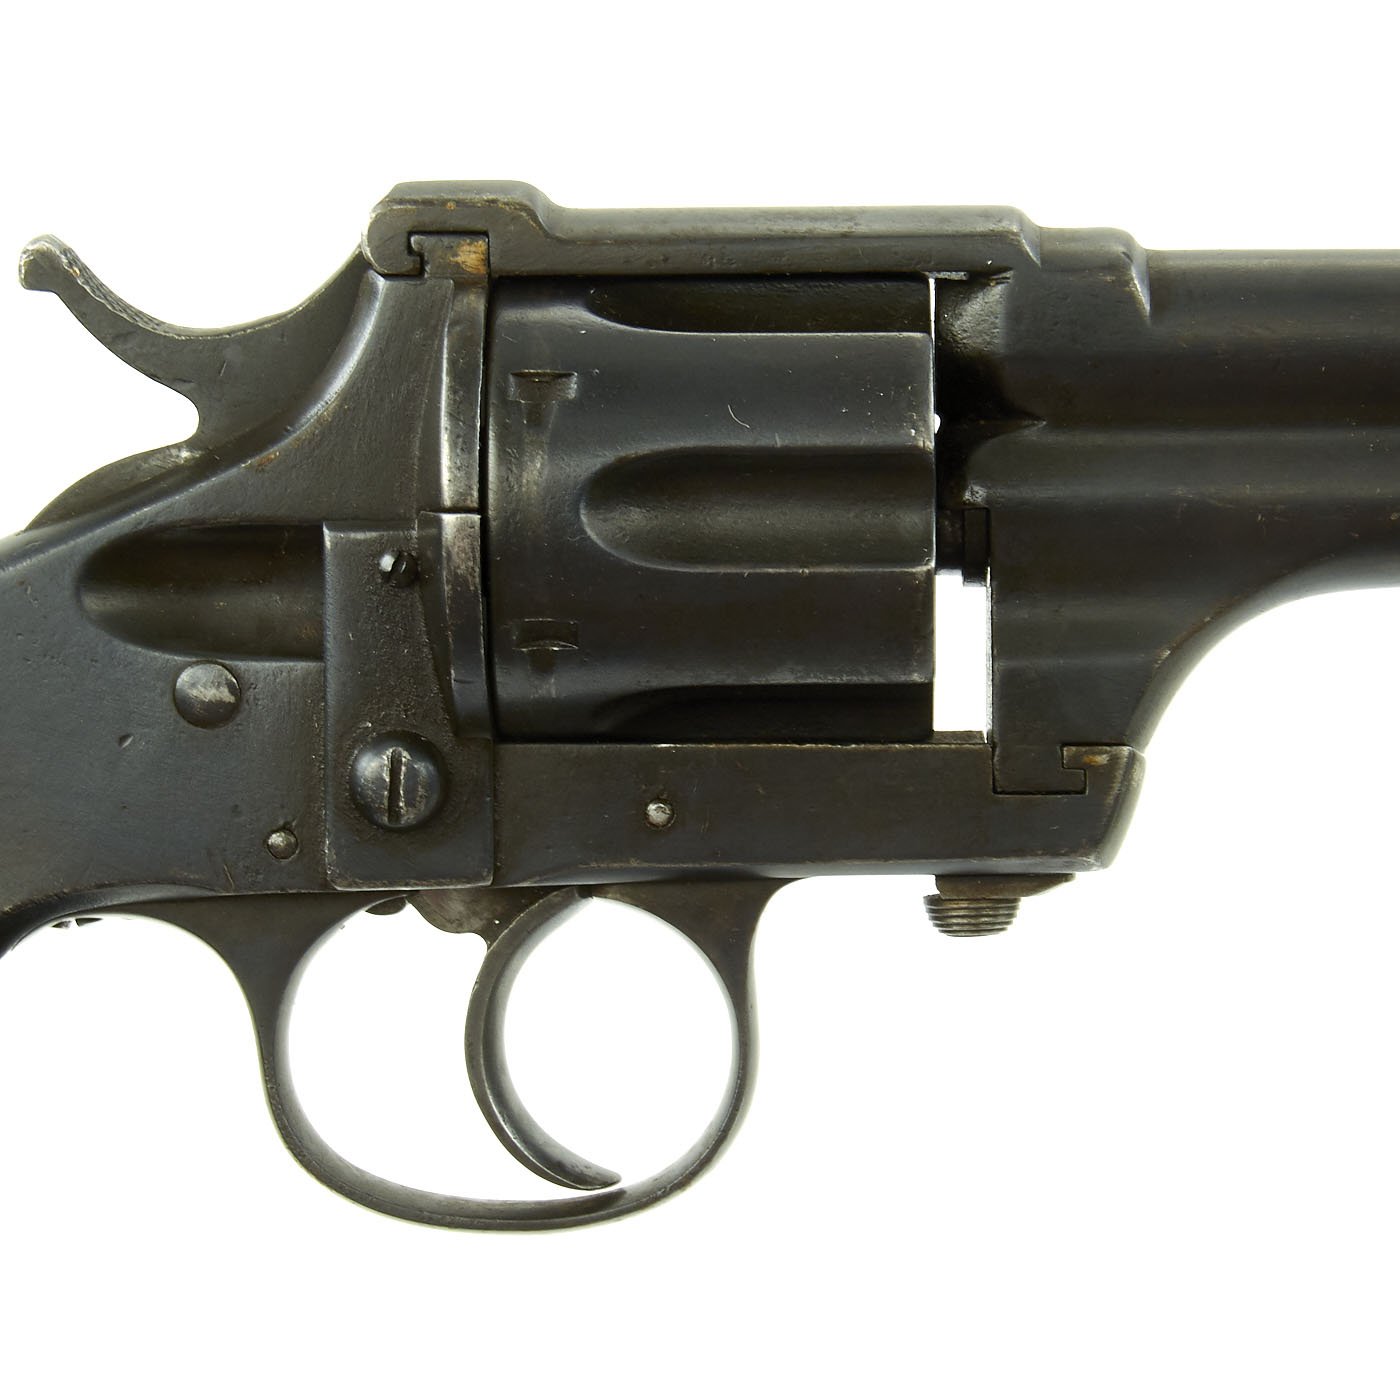 44/40 1883 Model Double Action Frontier S&W